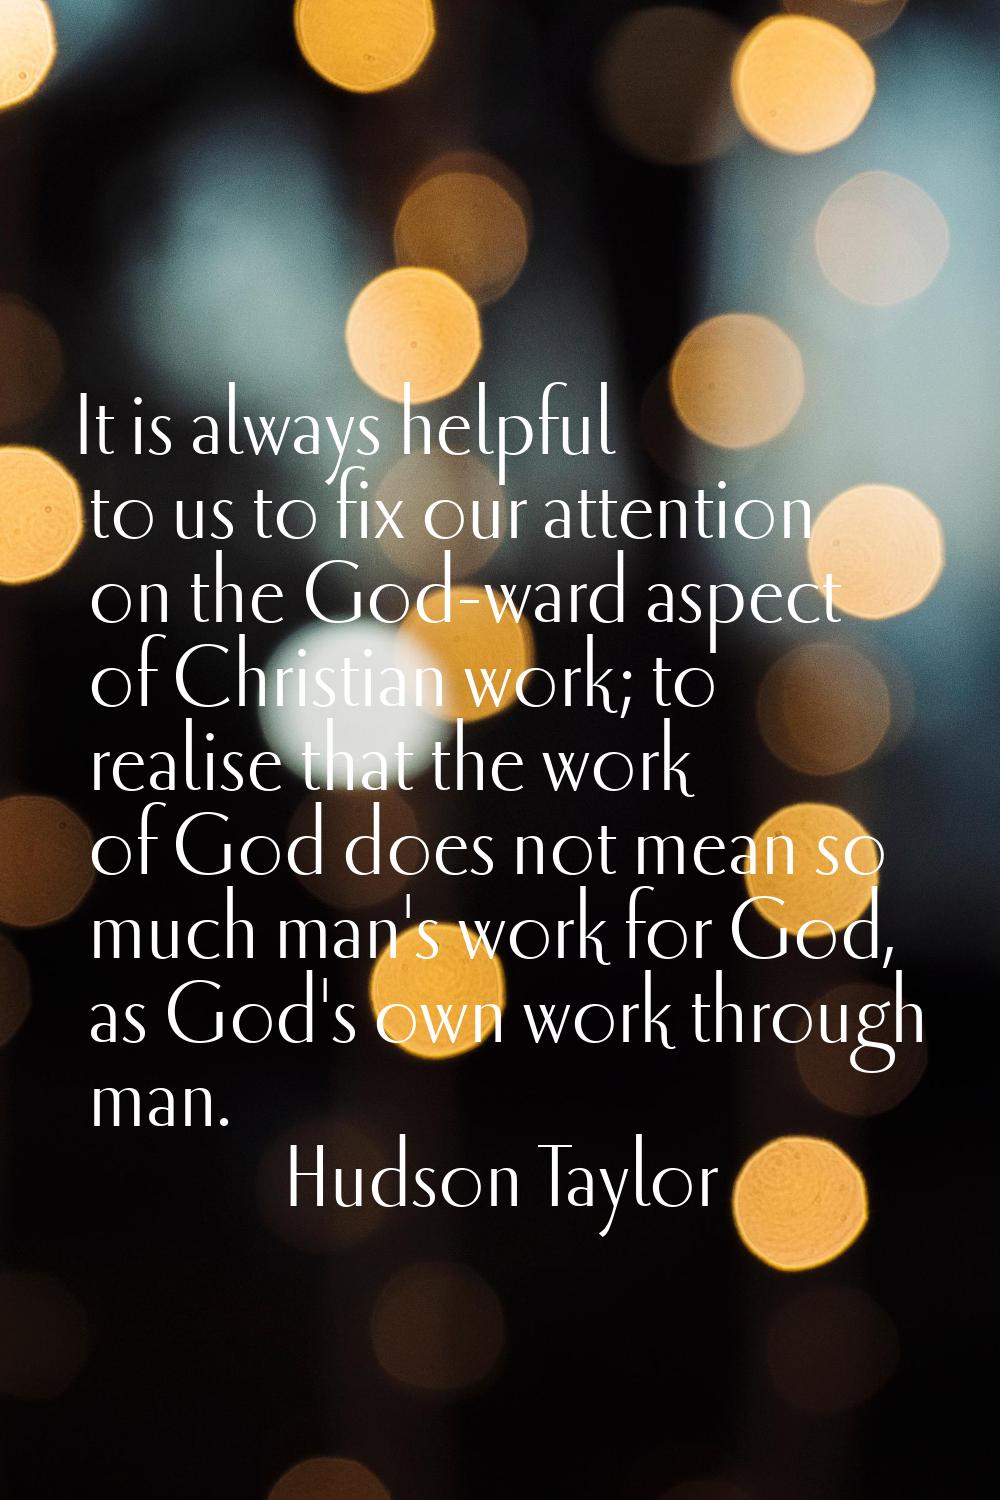 It is always helpful to us to fix our attention on the God-ward aspect of Christian work; to realis